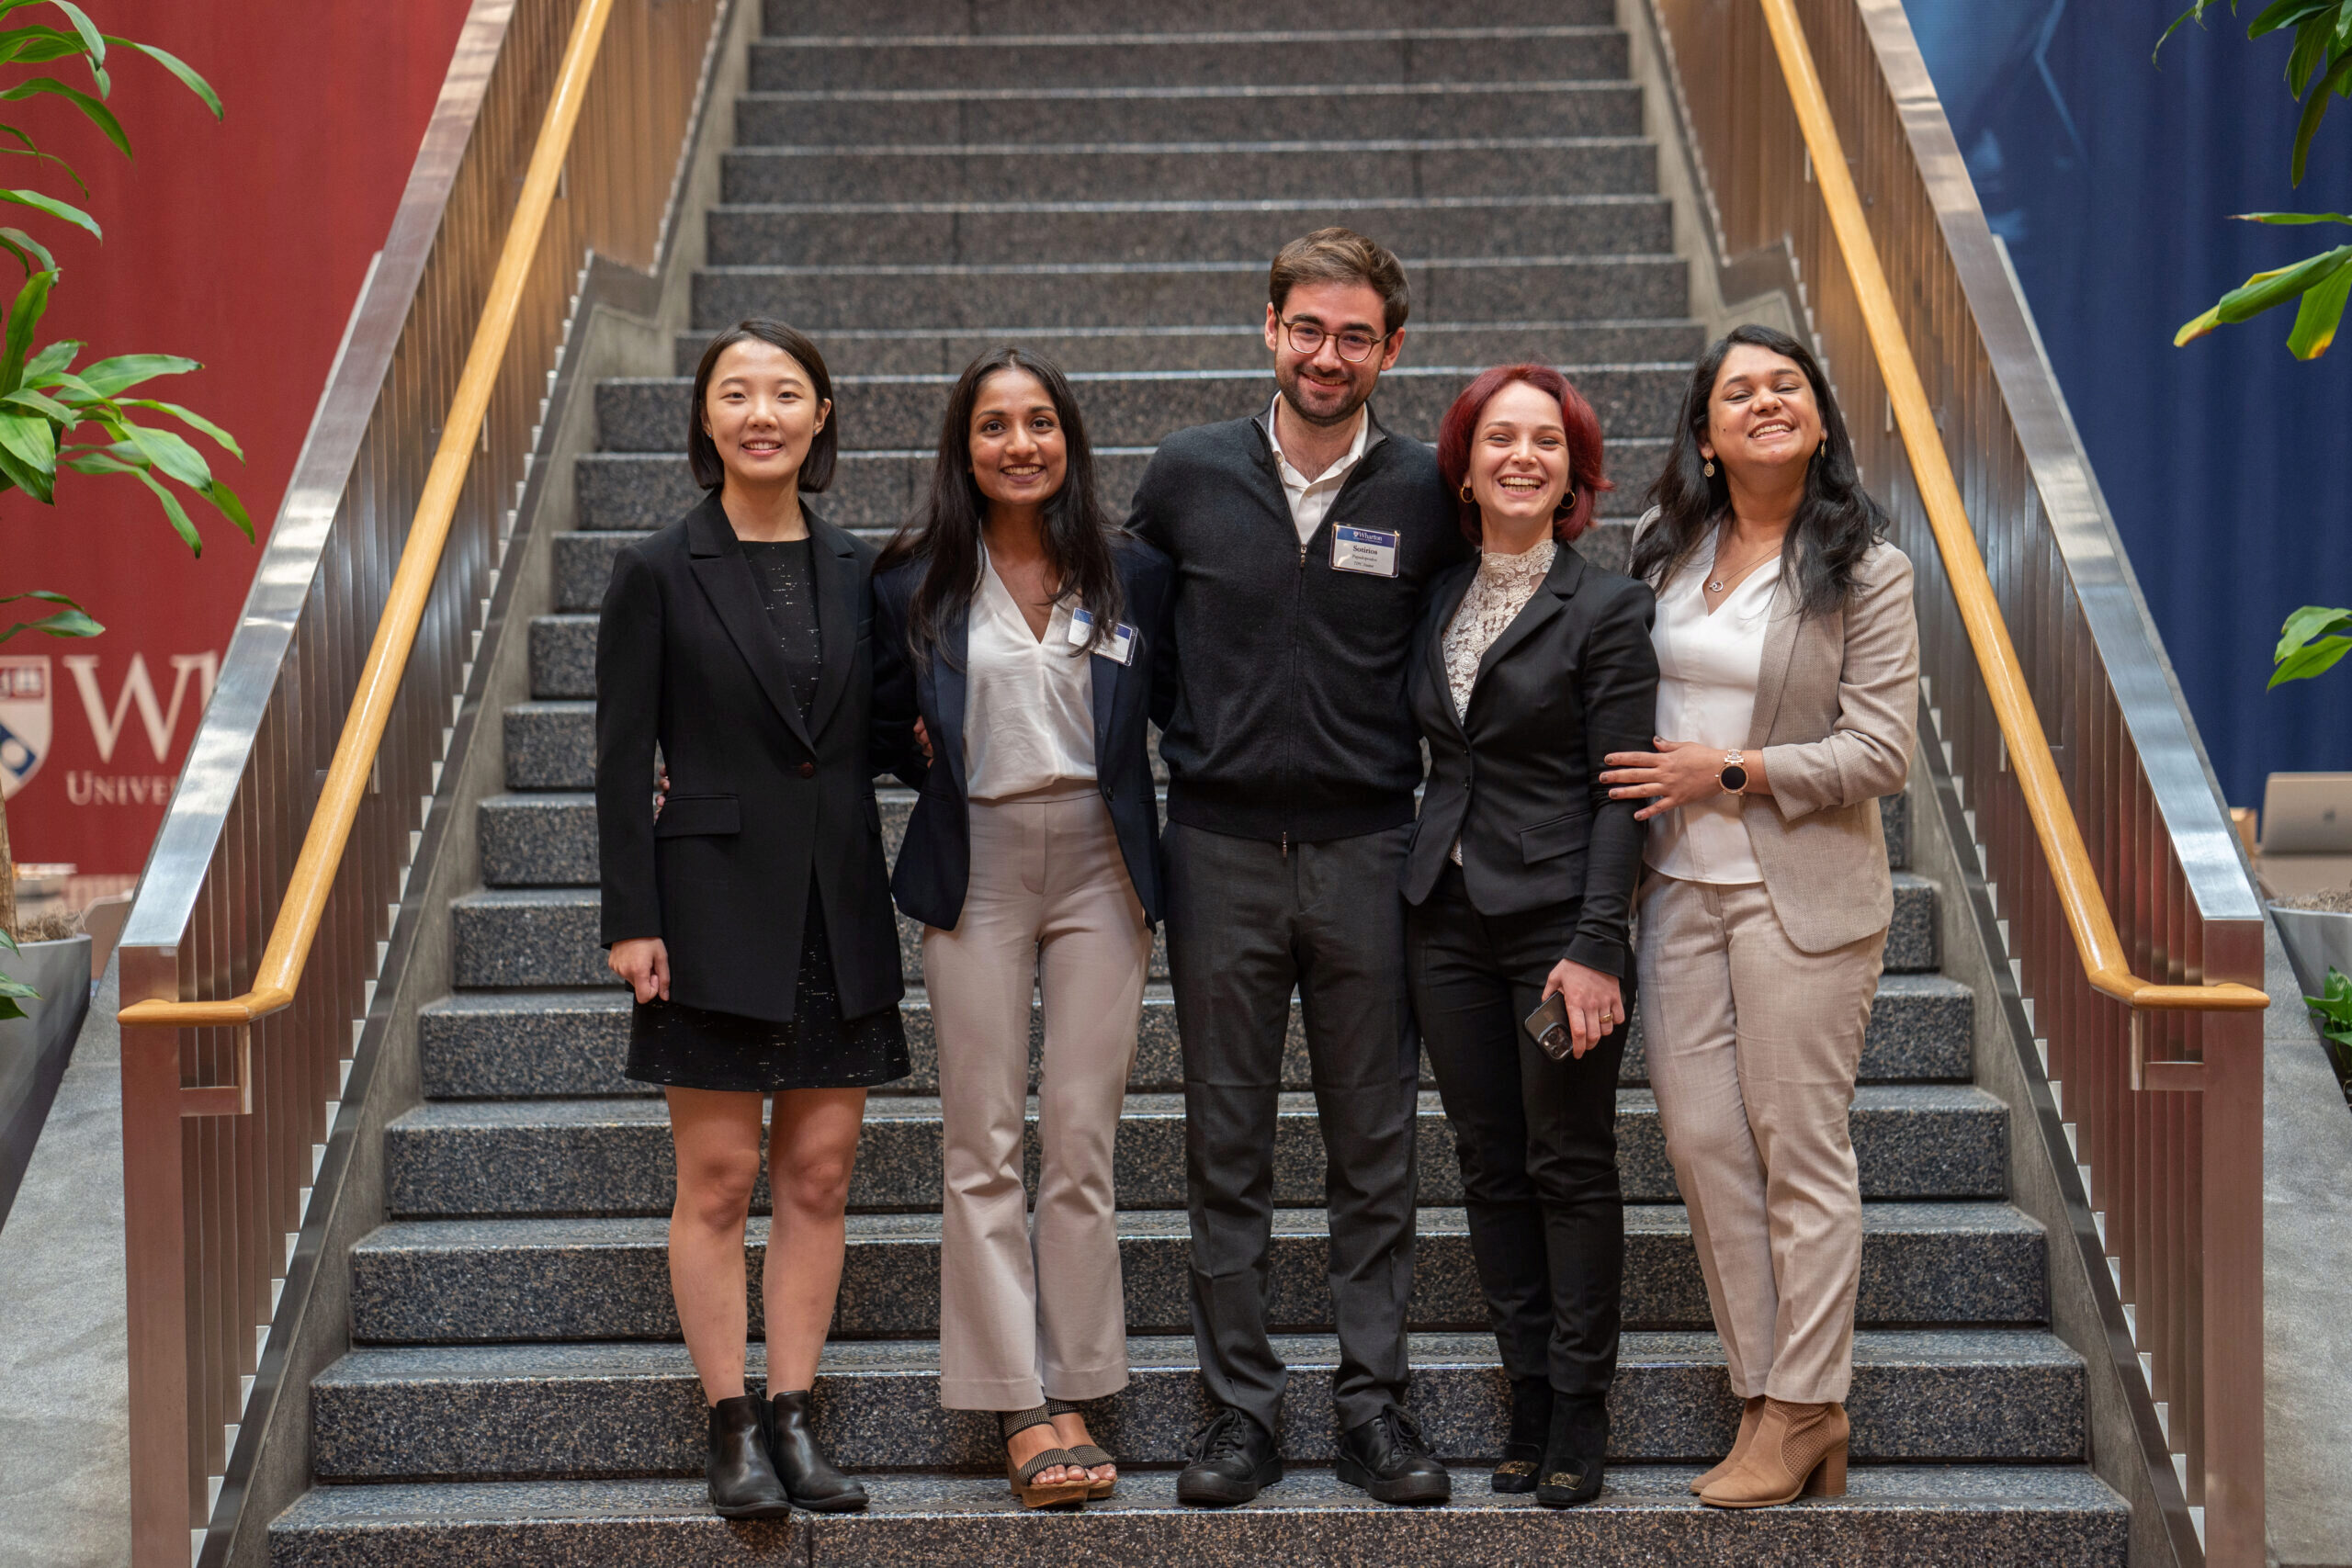 Image of the 5 members of the winning The Fletcher School, Tufts University team on the stairs of Huntsman Hall.